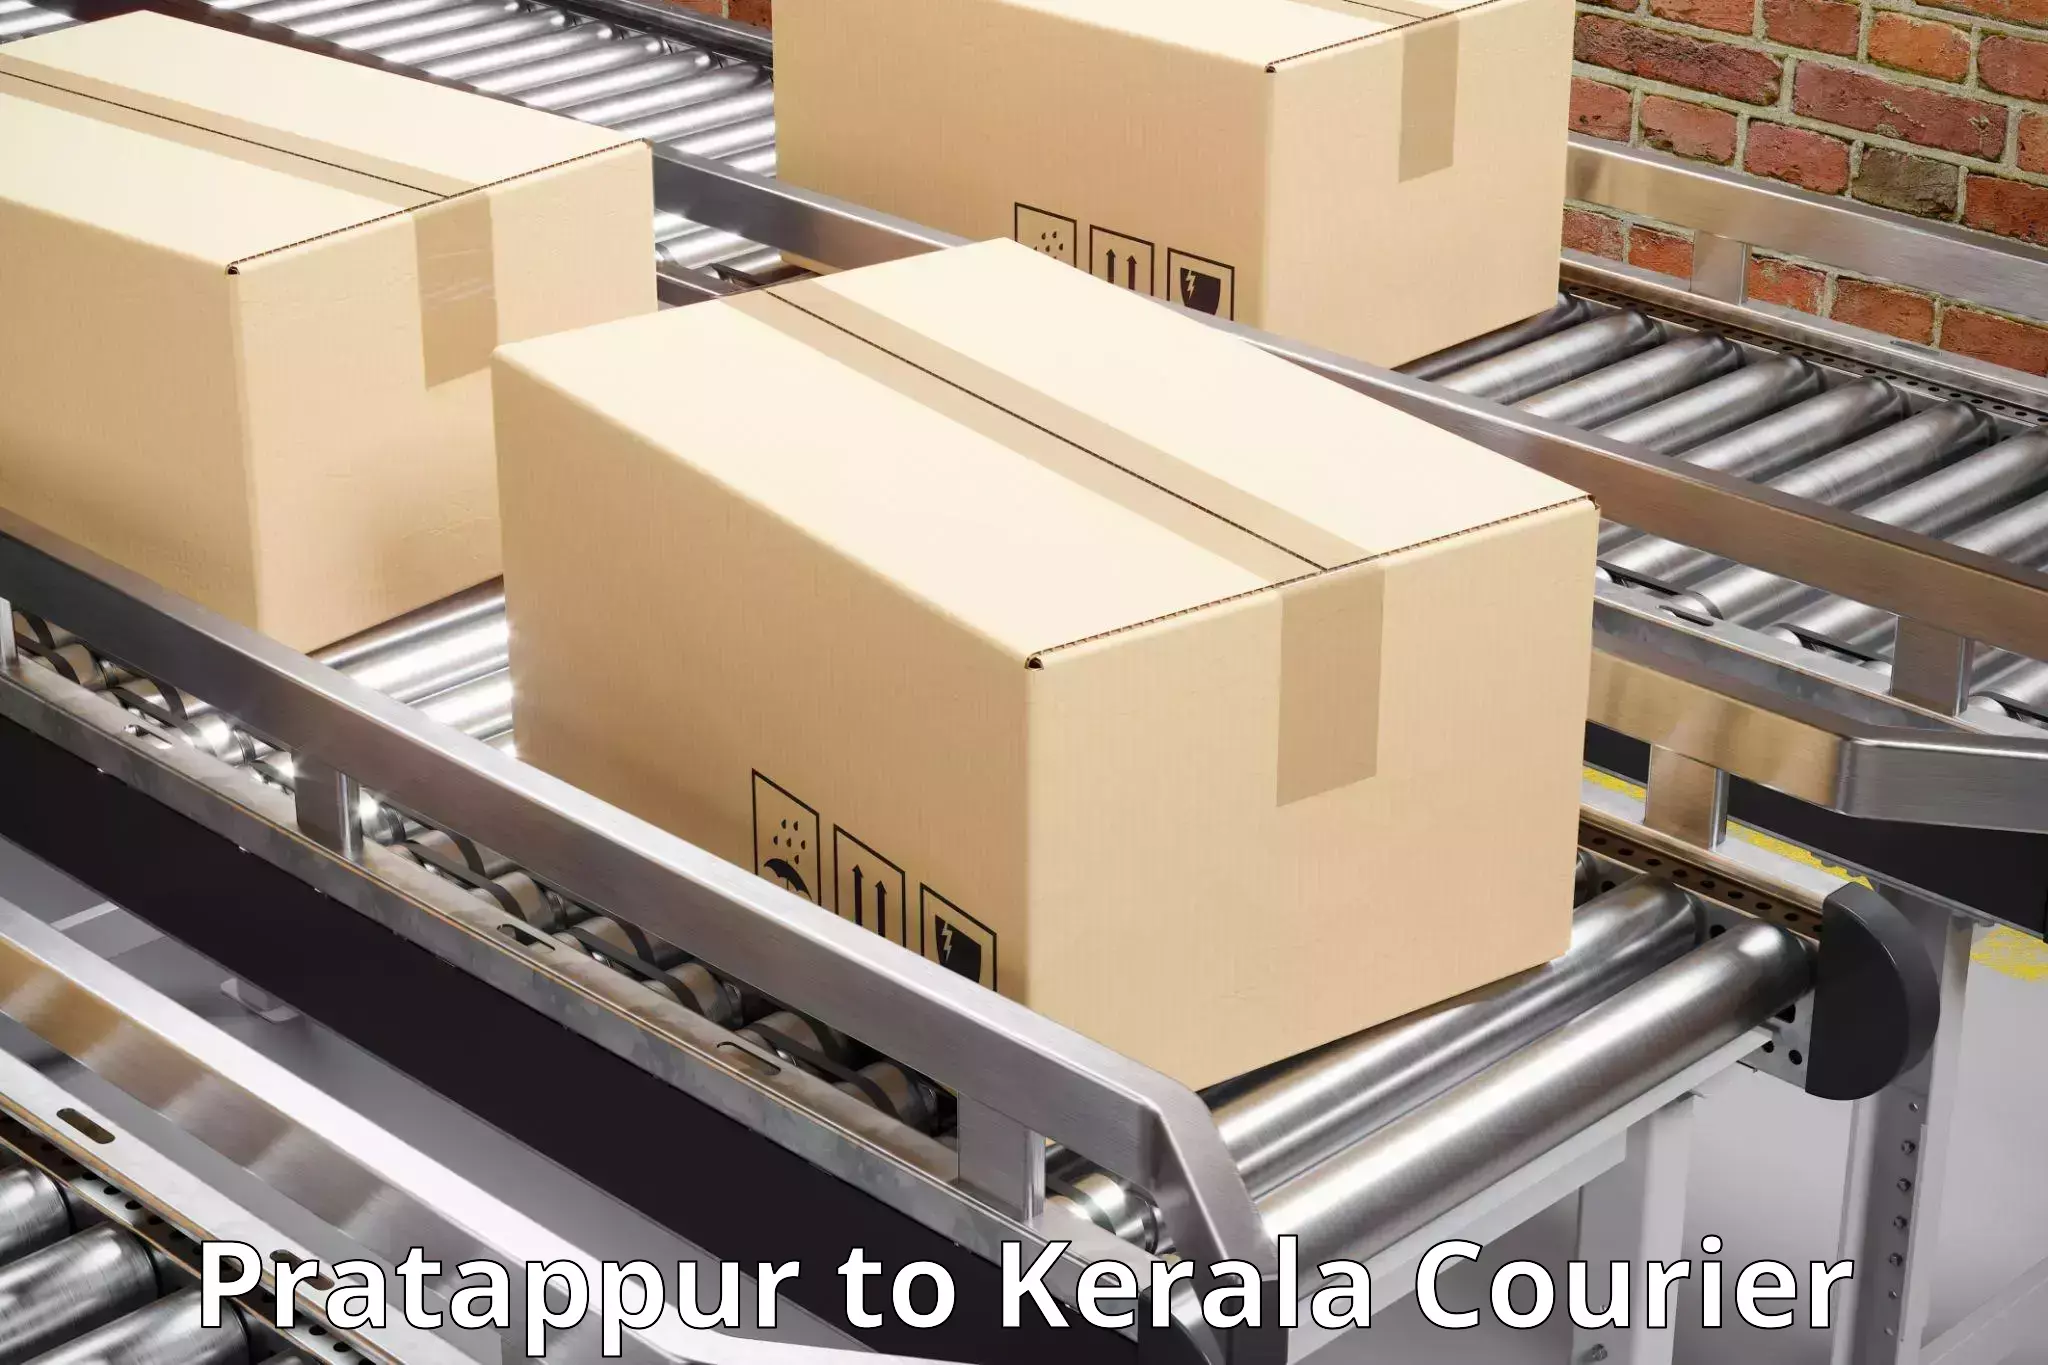 Secure package delivery Pratappur to Cochin Port Kochi